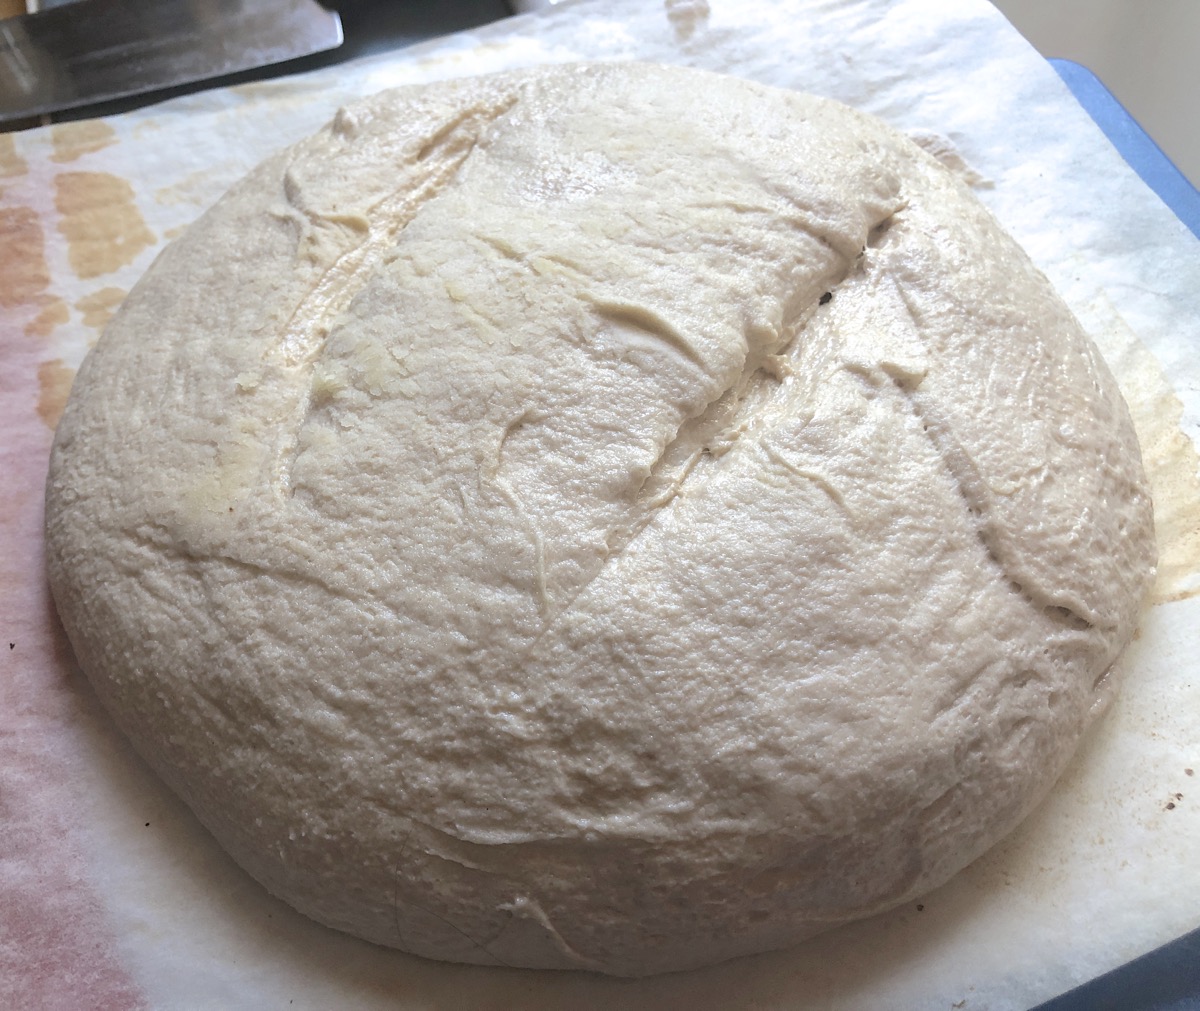 Large, round, flat loaf of bread, slashed and ready to bake.